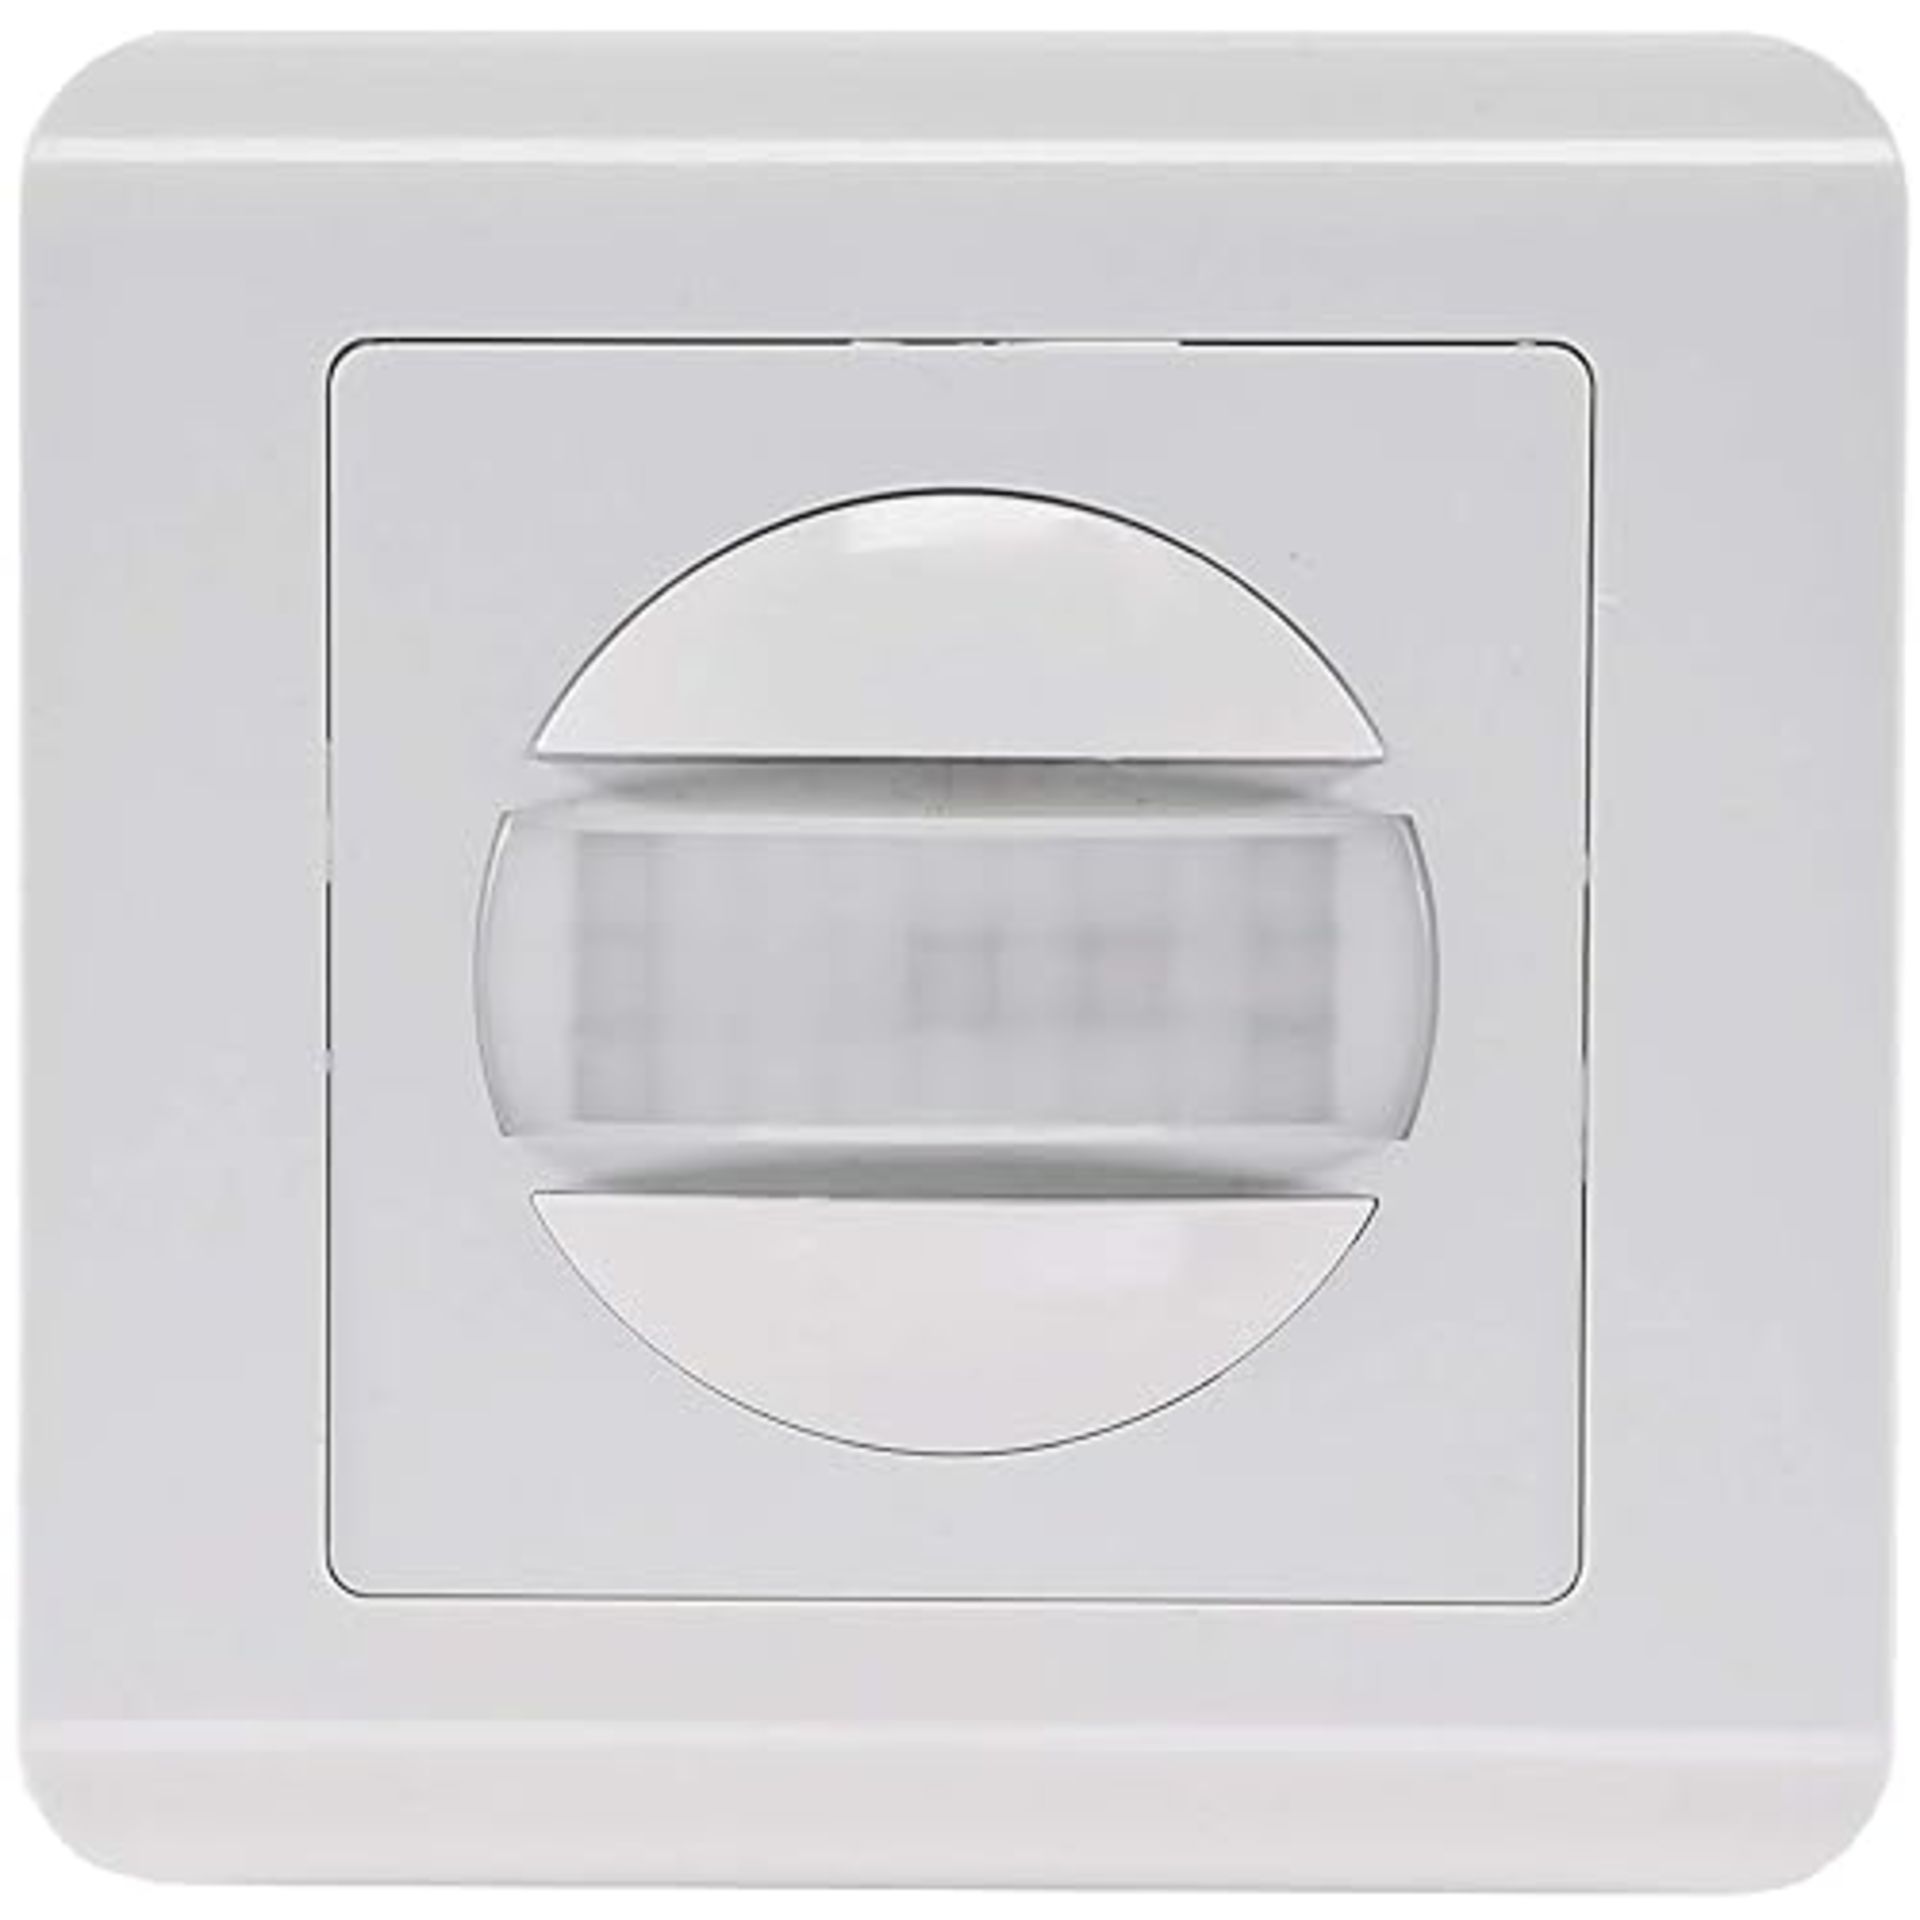 Motion Sensor 160° Flush-Mounted 9 M Detection 2-Wire Technology For Light Switch Wall Installat...